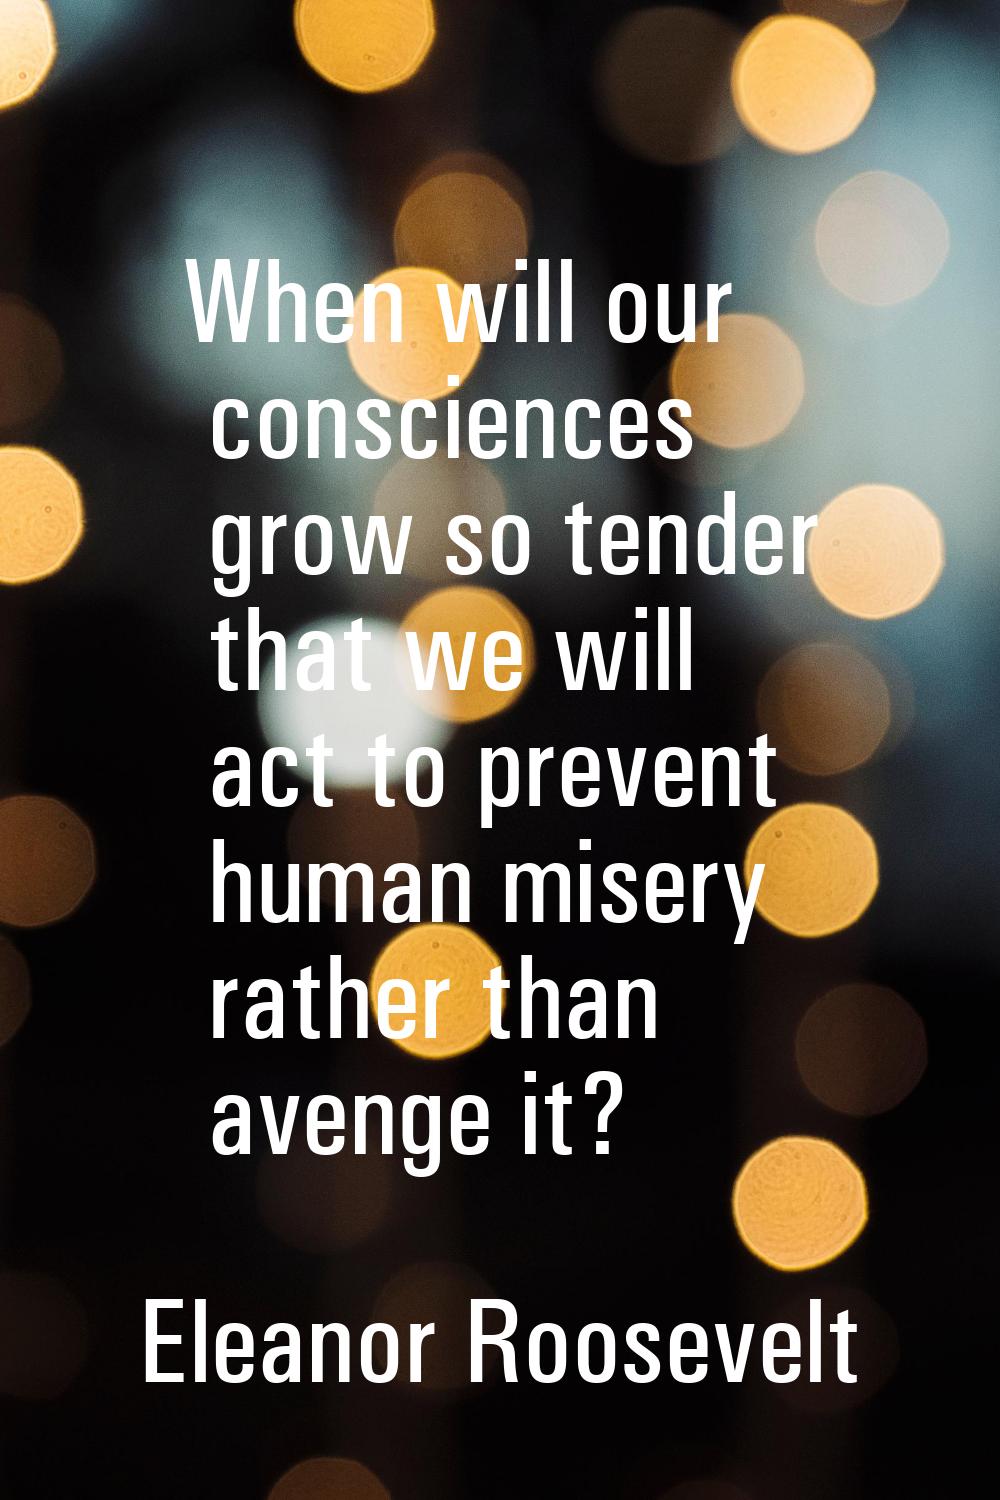 When will our consciences grow so tender that we will act to prevent human misery rather than aveng